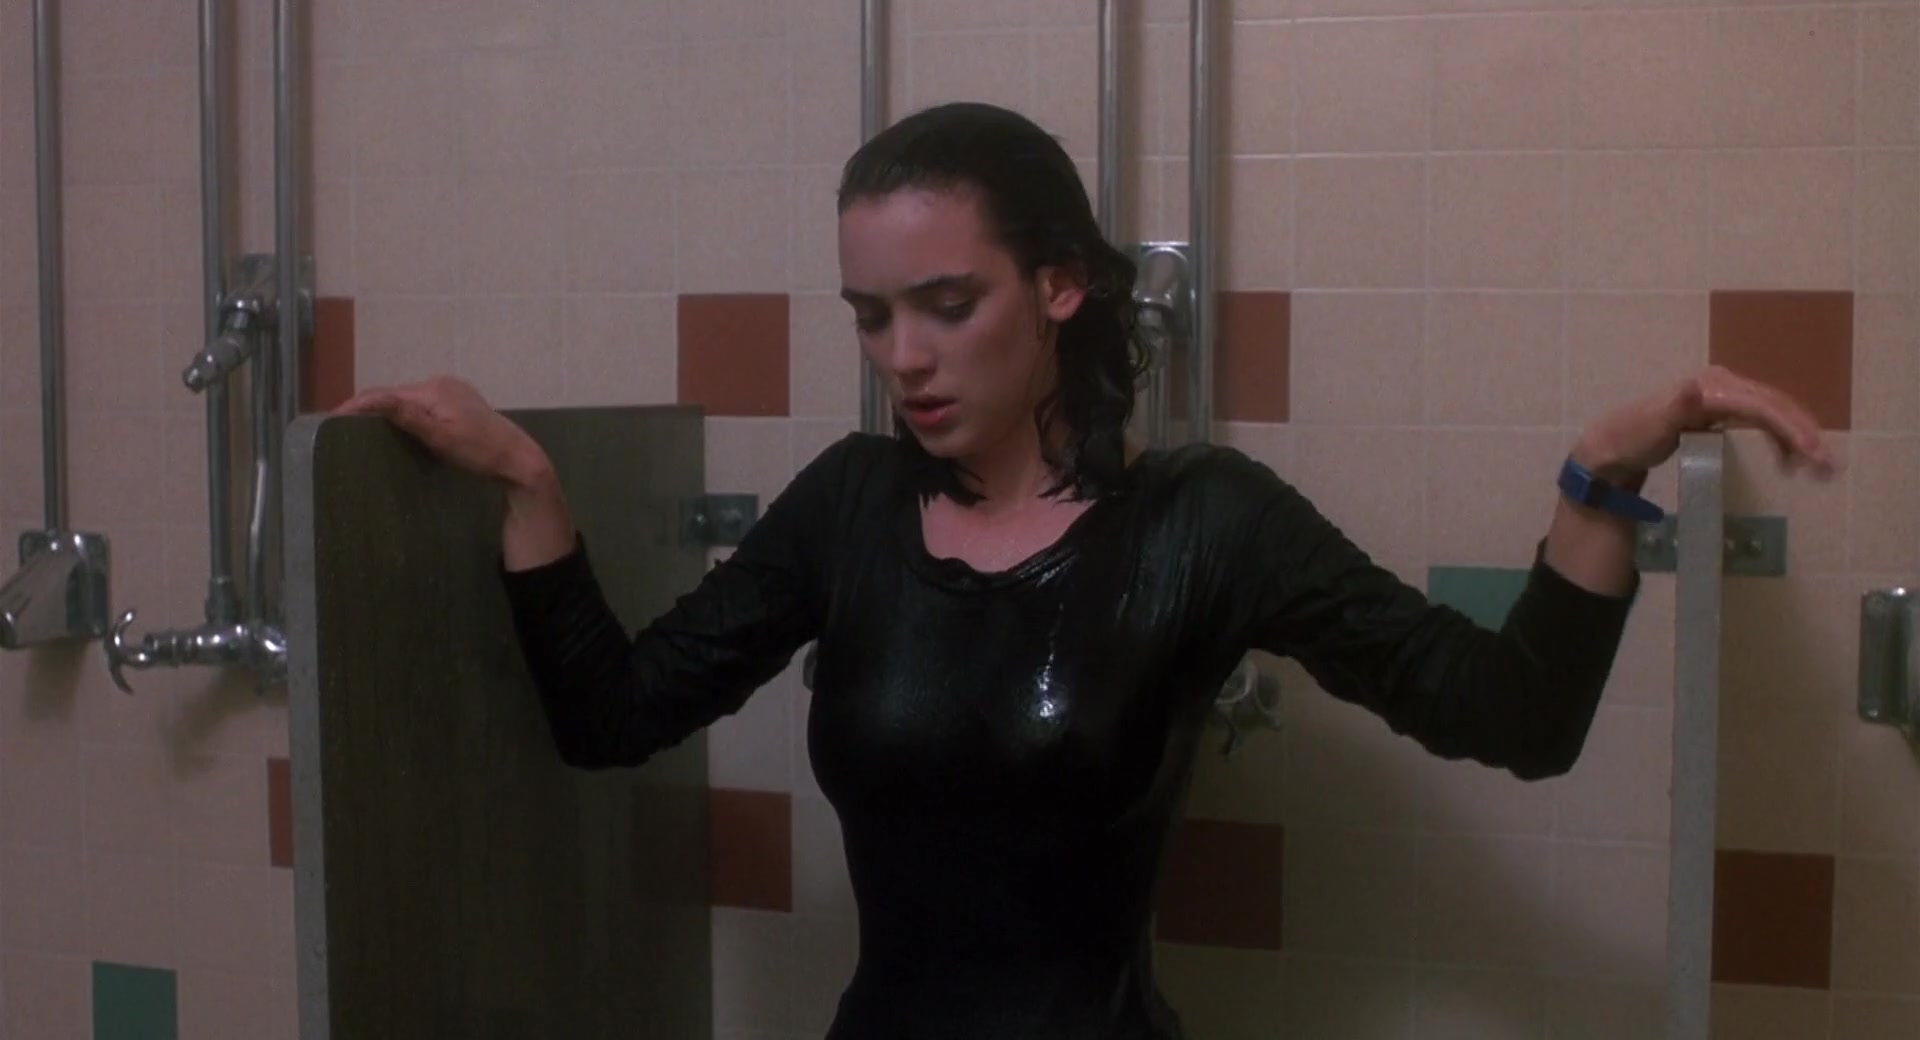 Winona ryder real nude